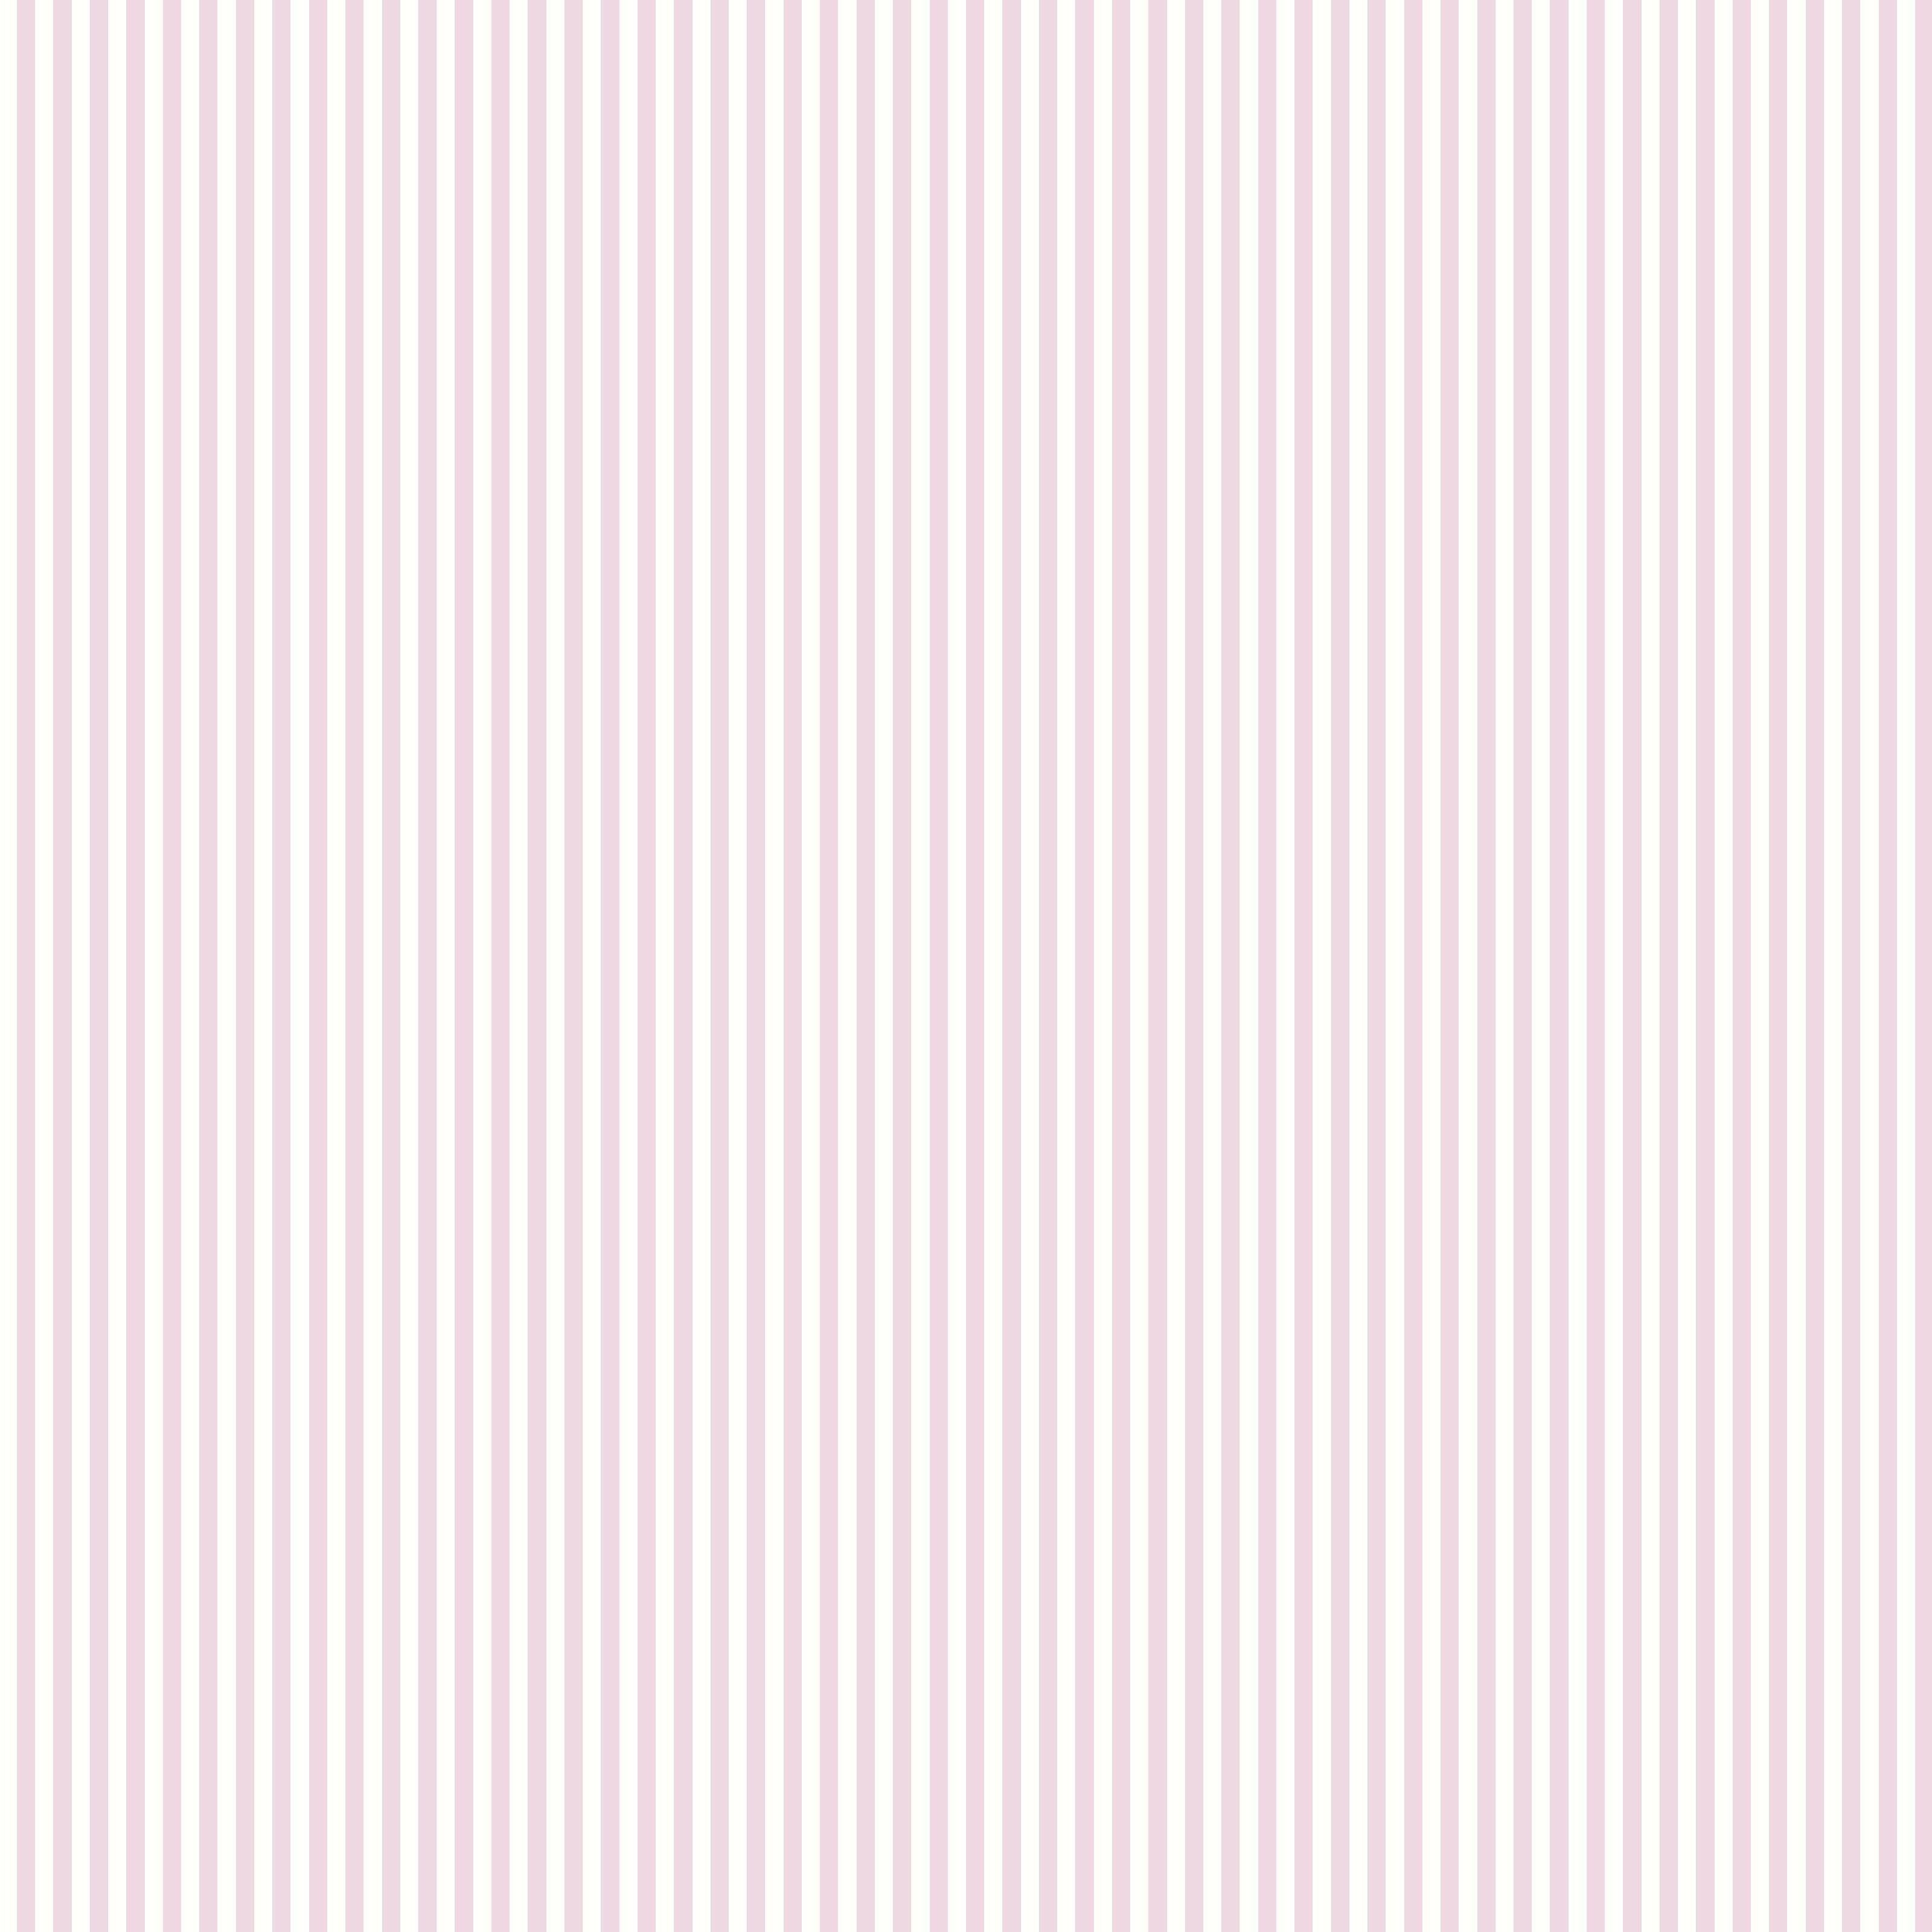 Superfresco Colours Pincord Pink Glitter effect Striped Smooth Wallpaper Sample